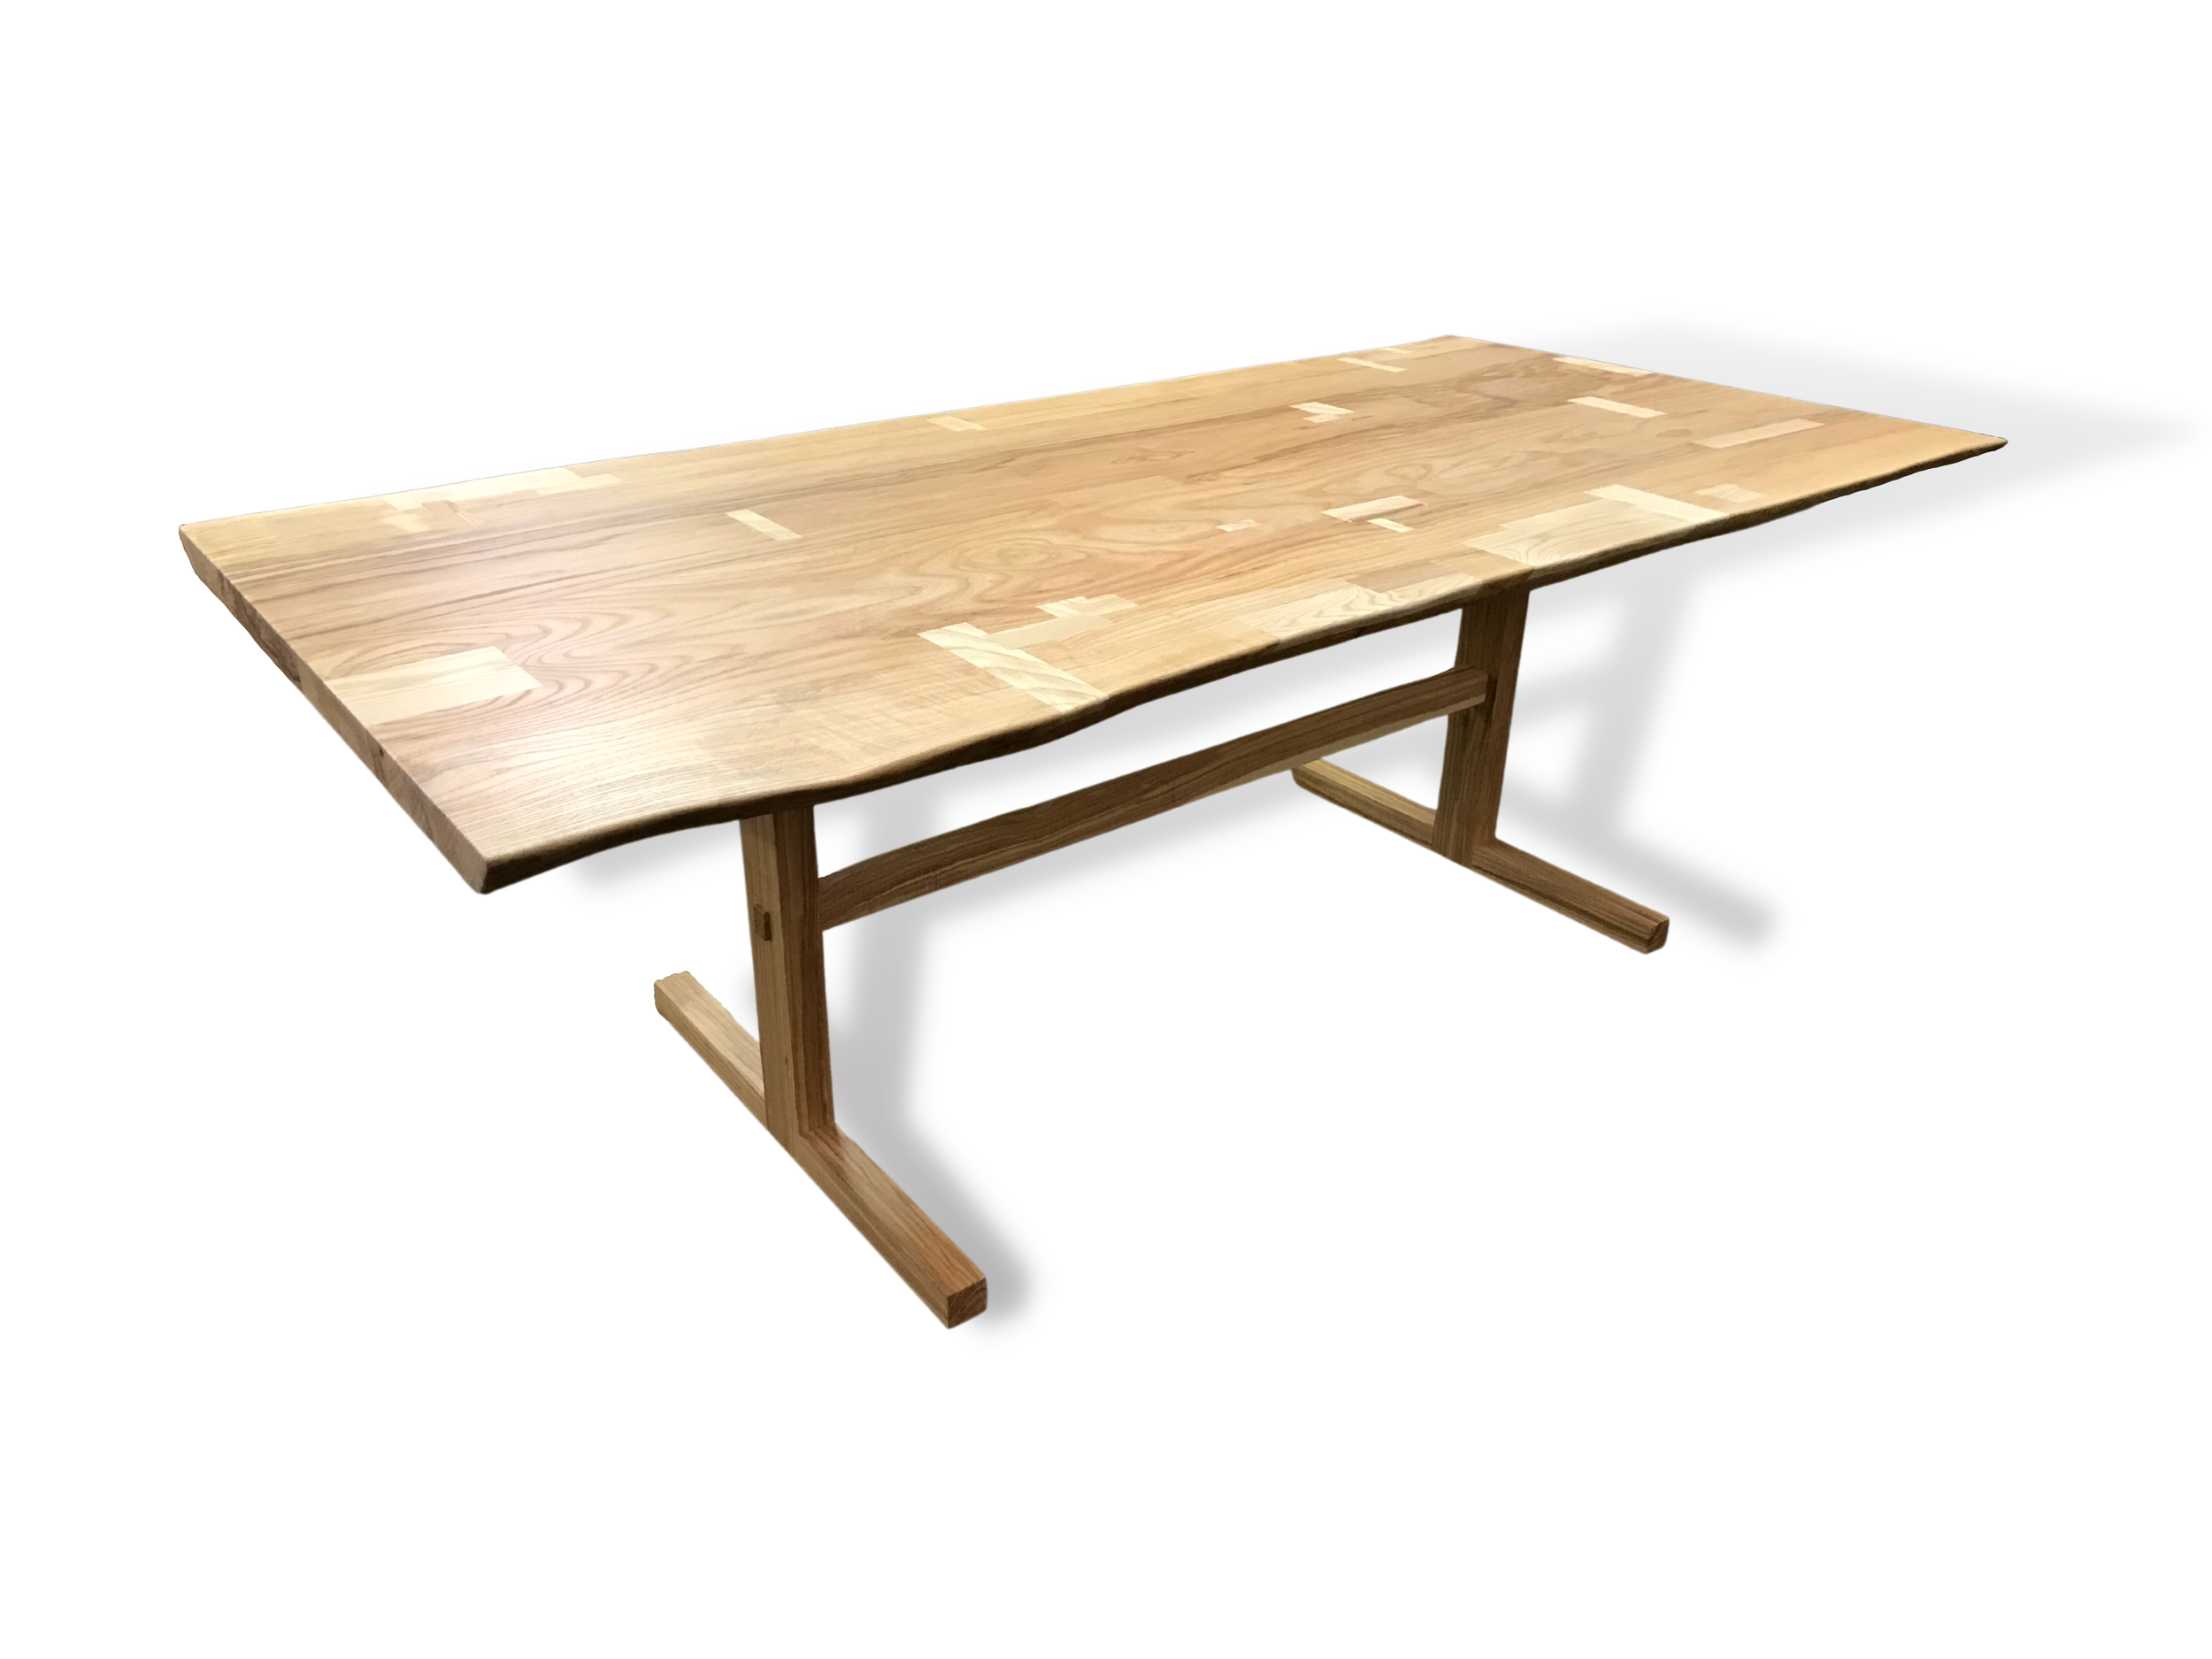 The Patchwork Trestle Table in Ash